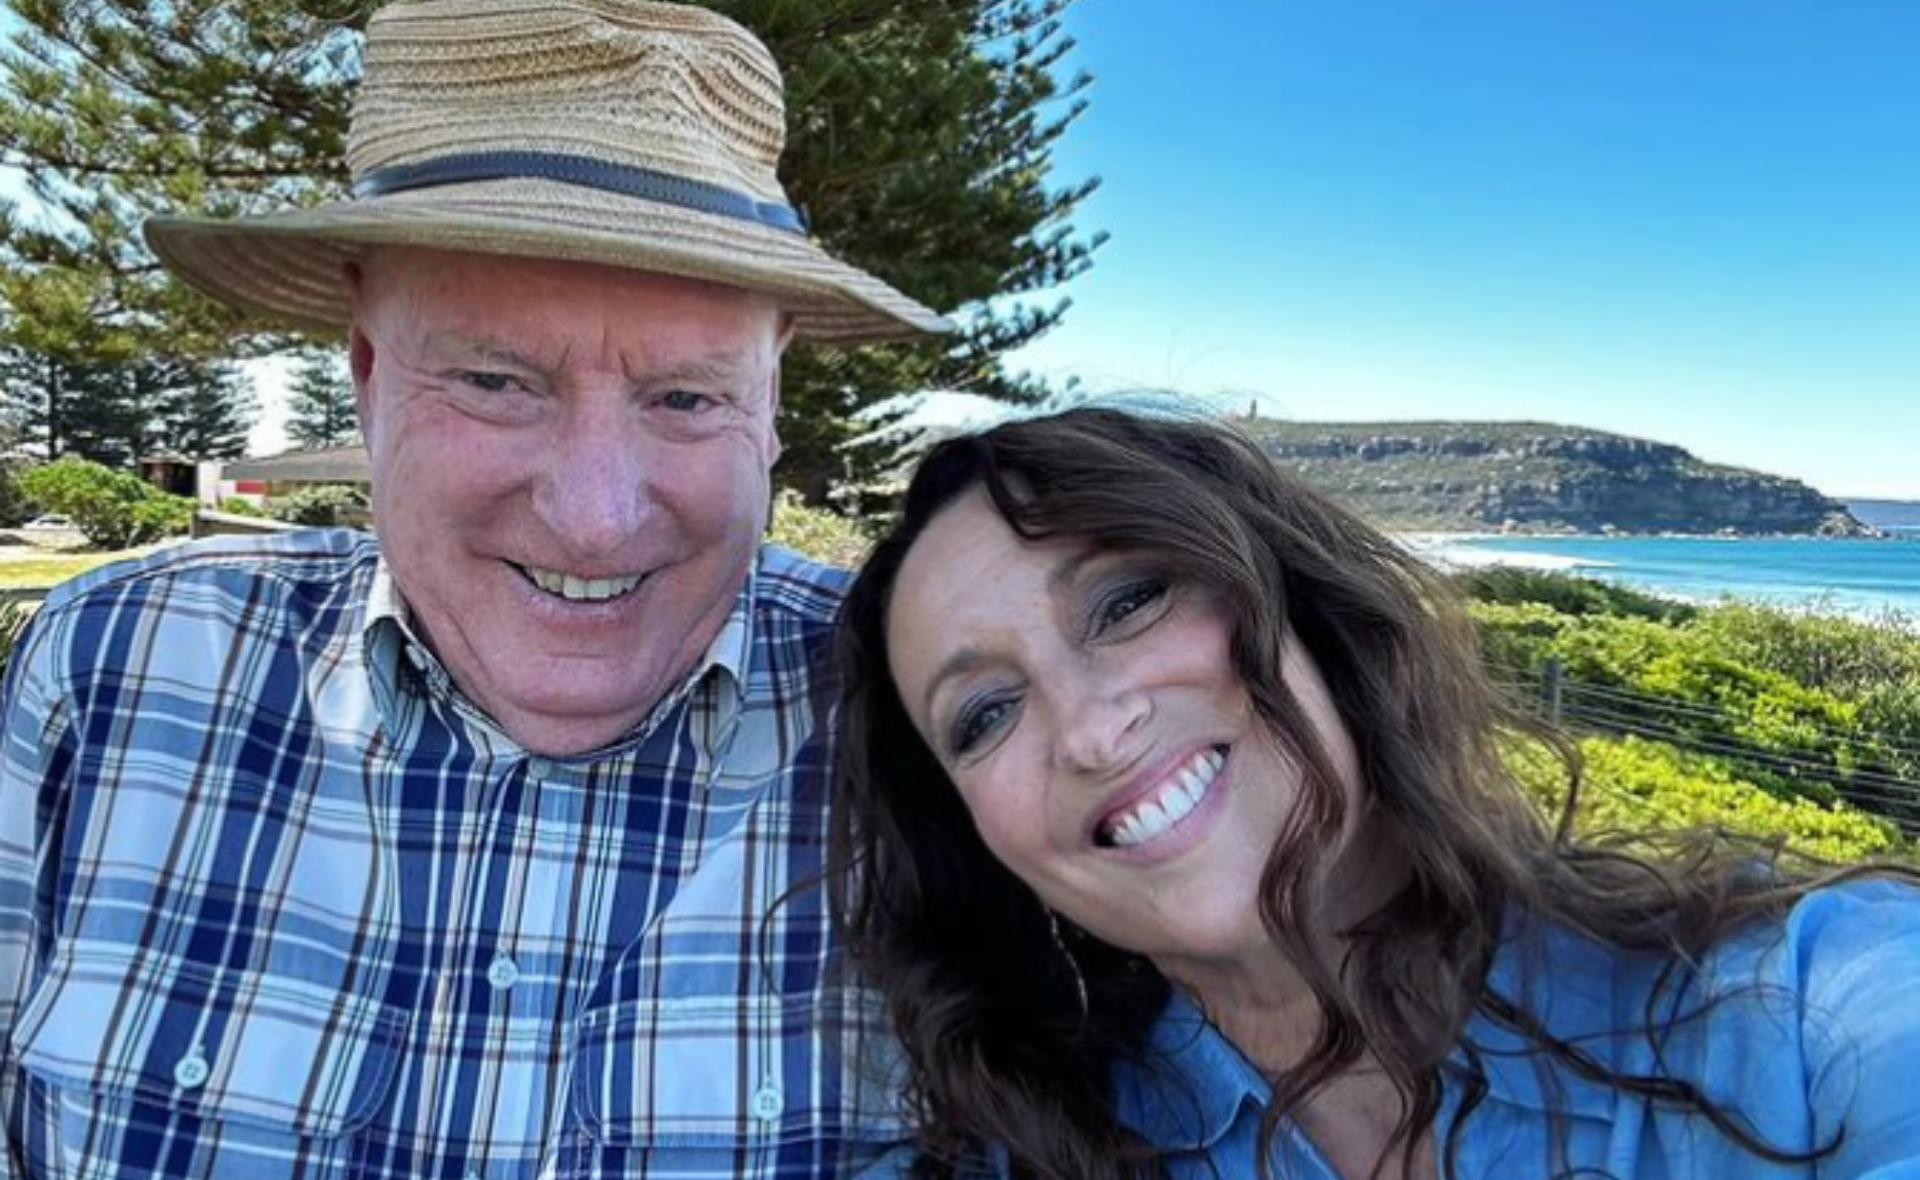 Georgie Parker and Ray Meagher reflect on their decades-long friendship